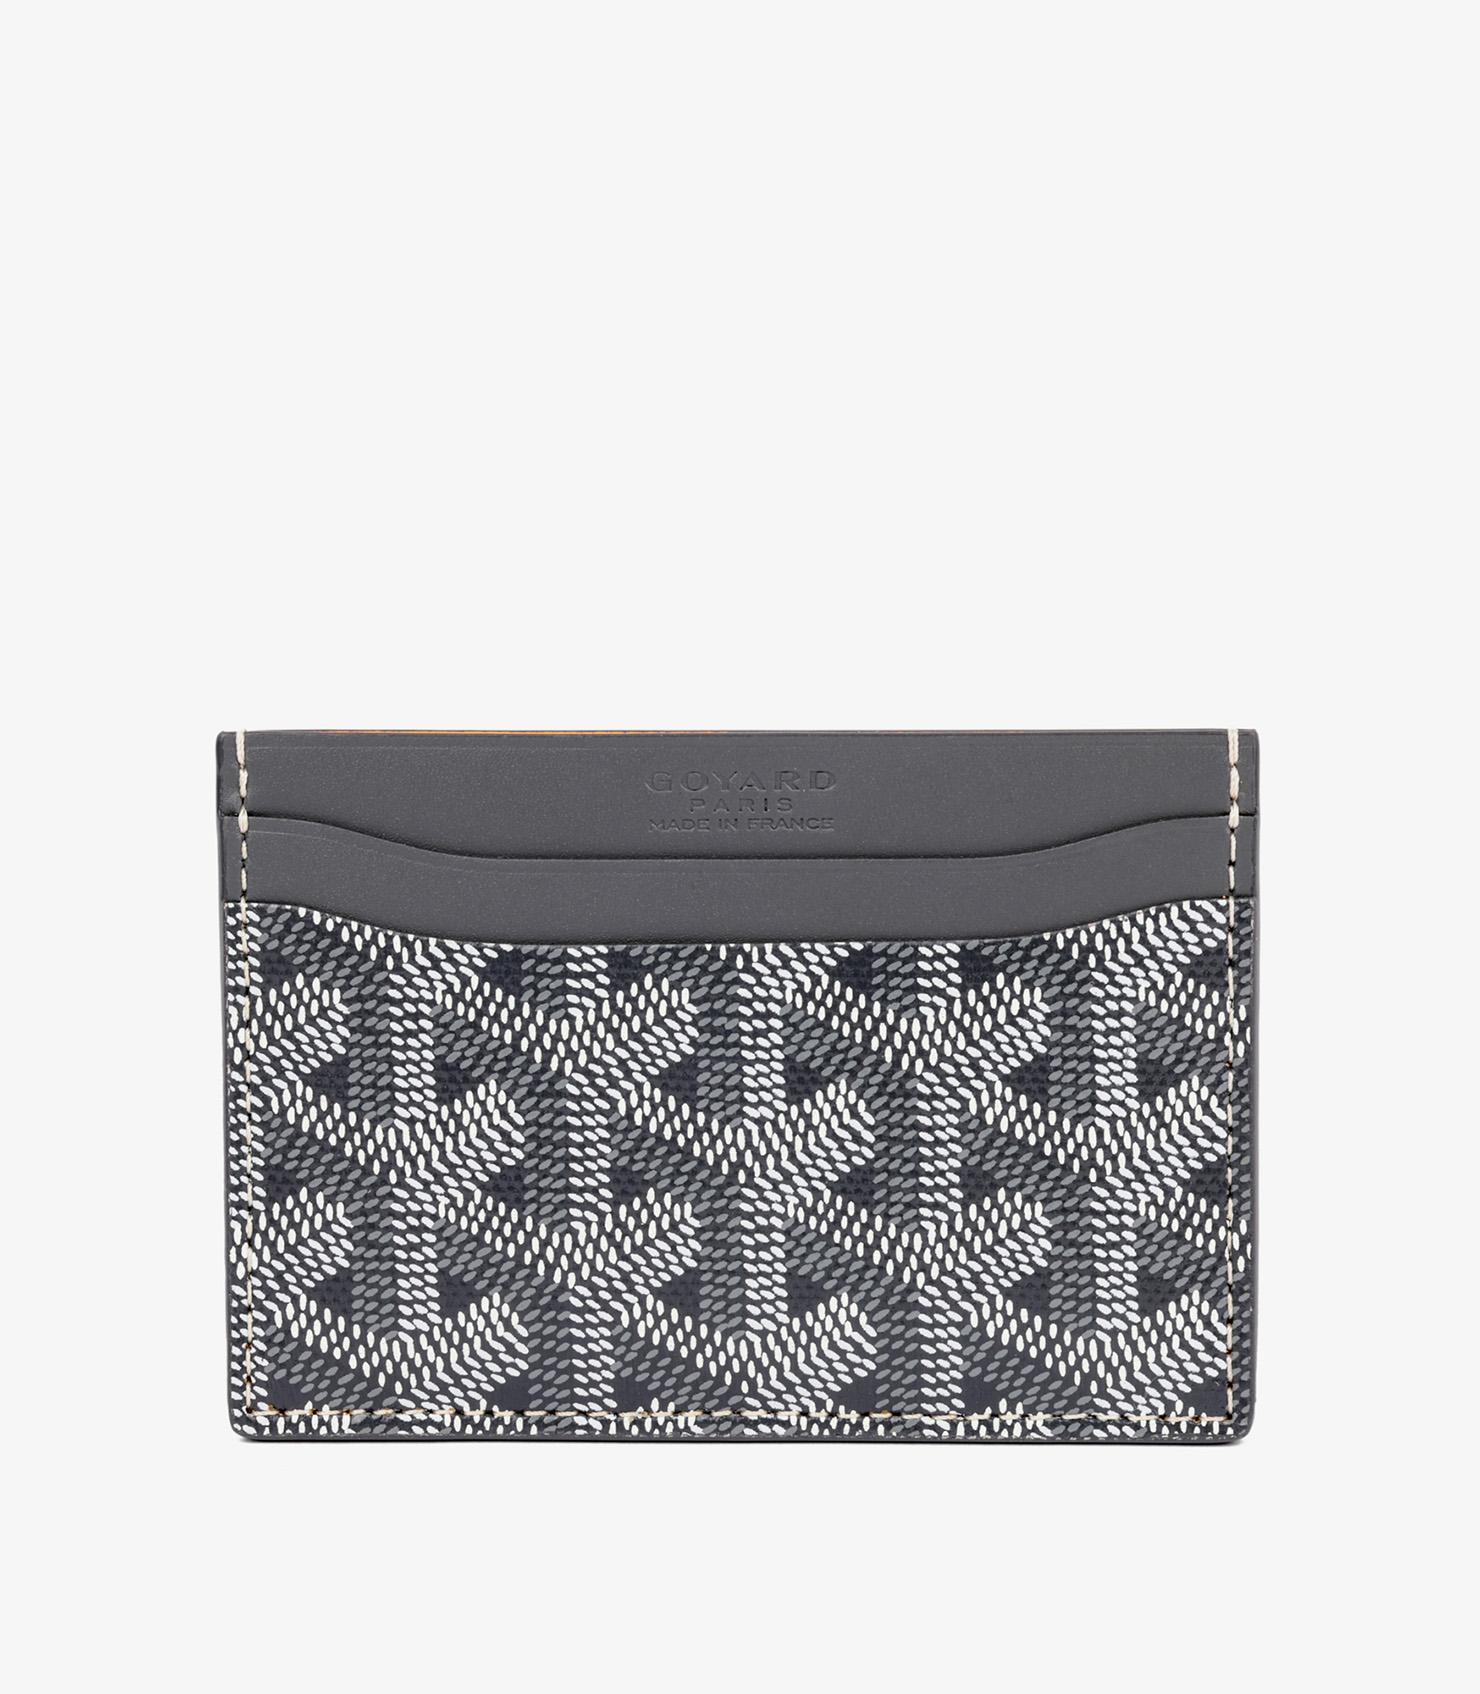 Goyard Grey Chevron Coated Canvas Saint Sulpice Cardholder

Model- Saint Sulpice Cardholder
Product Type- Cardholder
Serial Number- VAE02016
Age- Circa 2006
Colour- Grey
Material(s)- Coated Canvas
Authenticity Details- Date Stamp

Height- 7cm
Width-